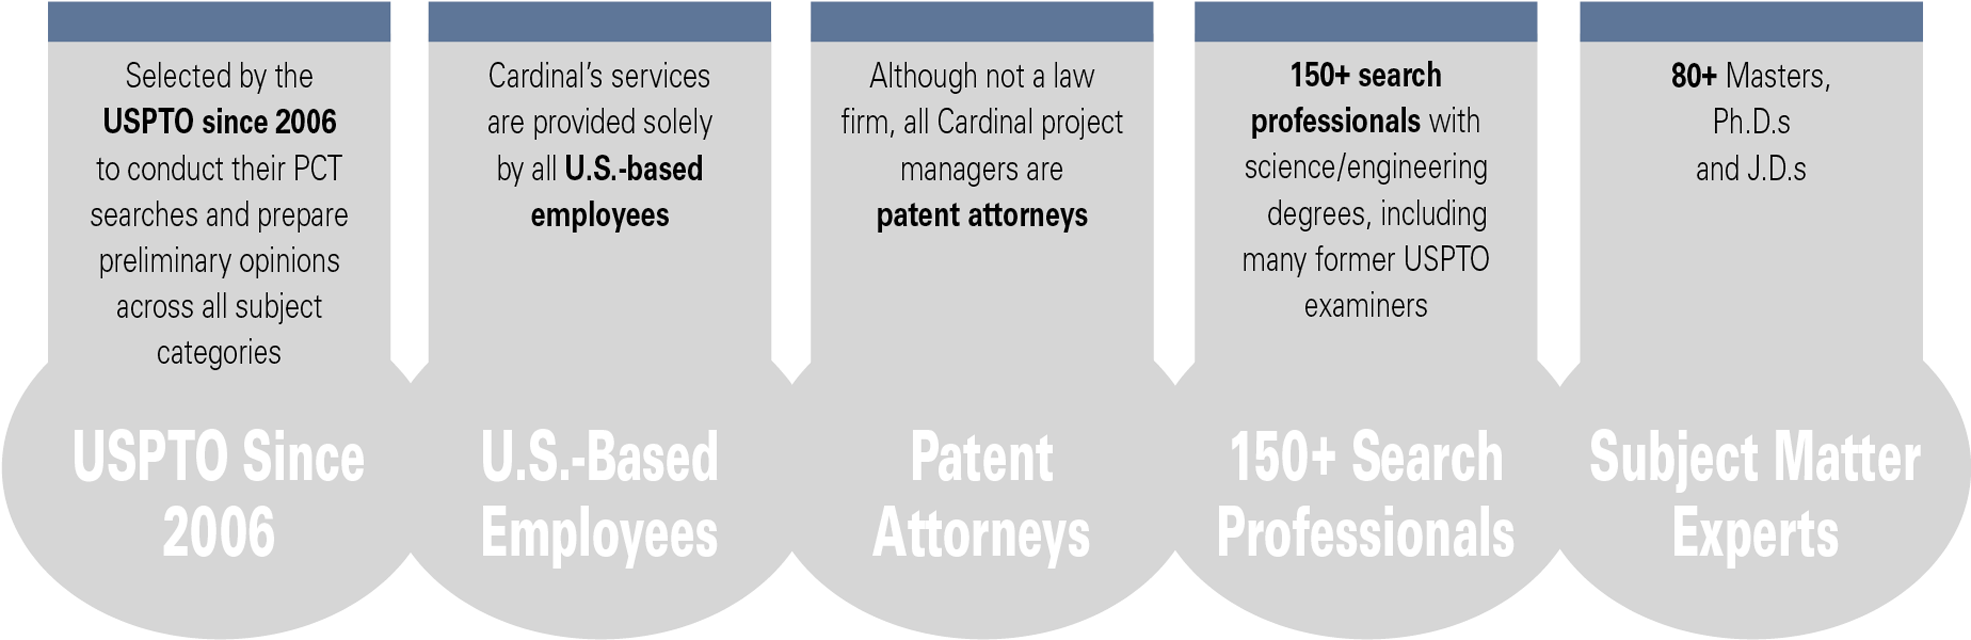 patent and trademark search